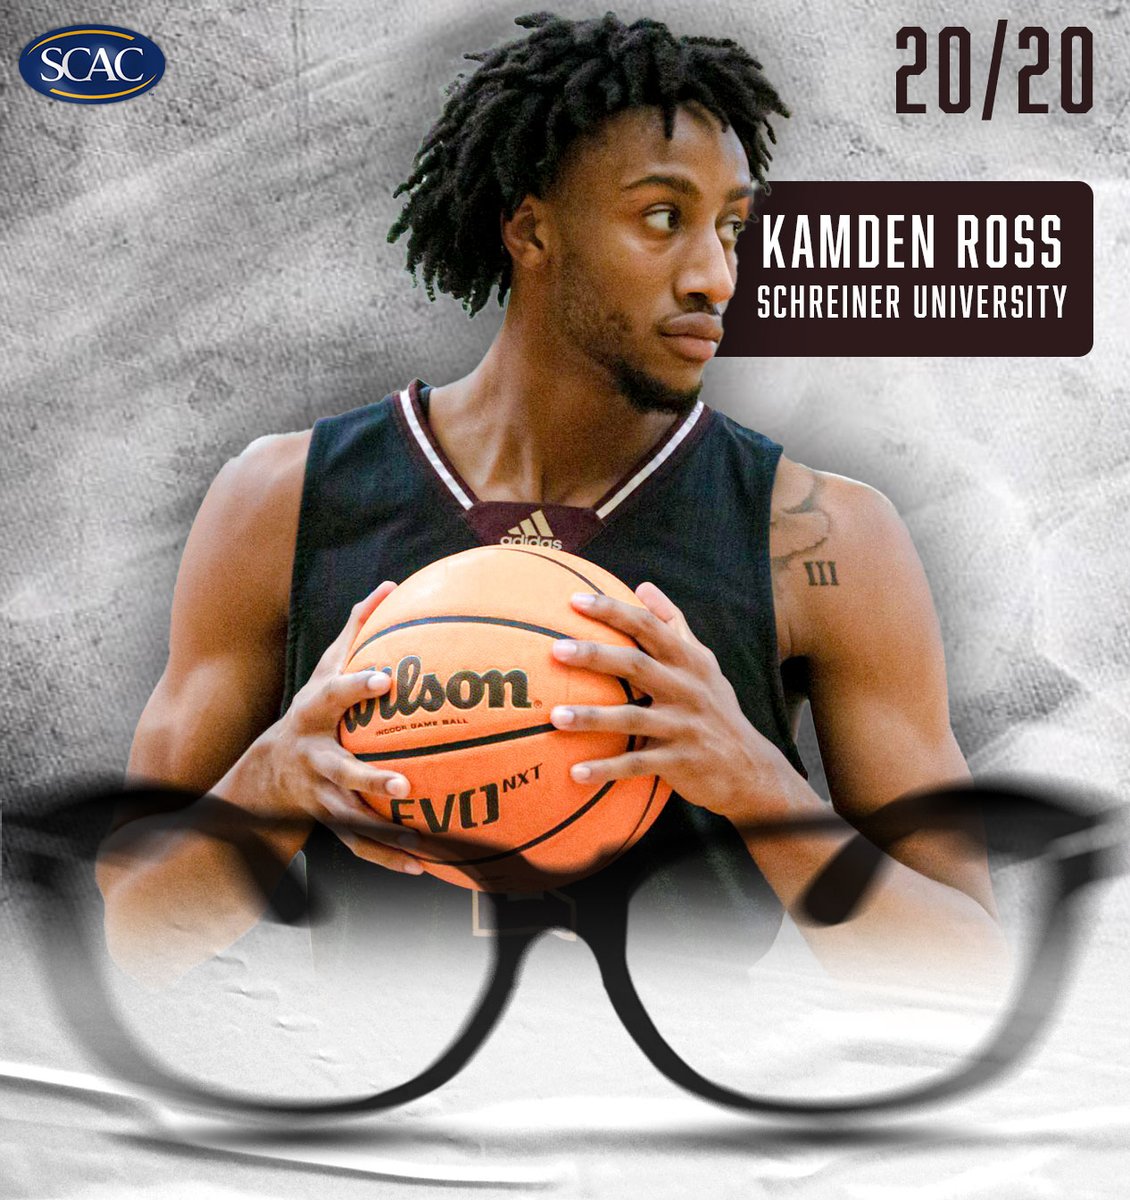 🚨#SCACMBB | Tonight @SUMountaineers Kamden Ross secured a 20/20 game.  23 pts and 22 rebs

The first in a conference game since Montgomery's 20 point and 26 rebounds game at Oglethorpe on 1/3/2006

The second 20/20 game recorded by a #SCAC athlete this season
#SCACPride #d3hoops